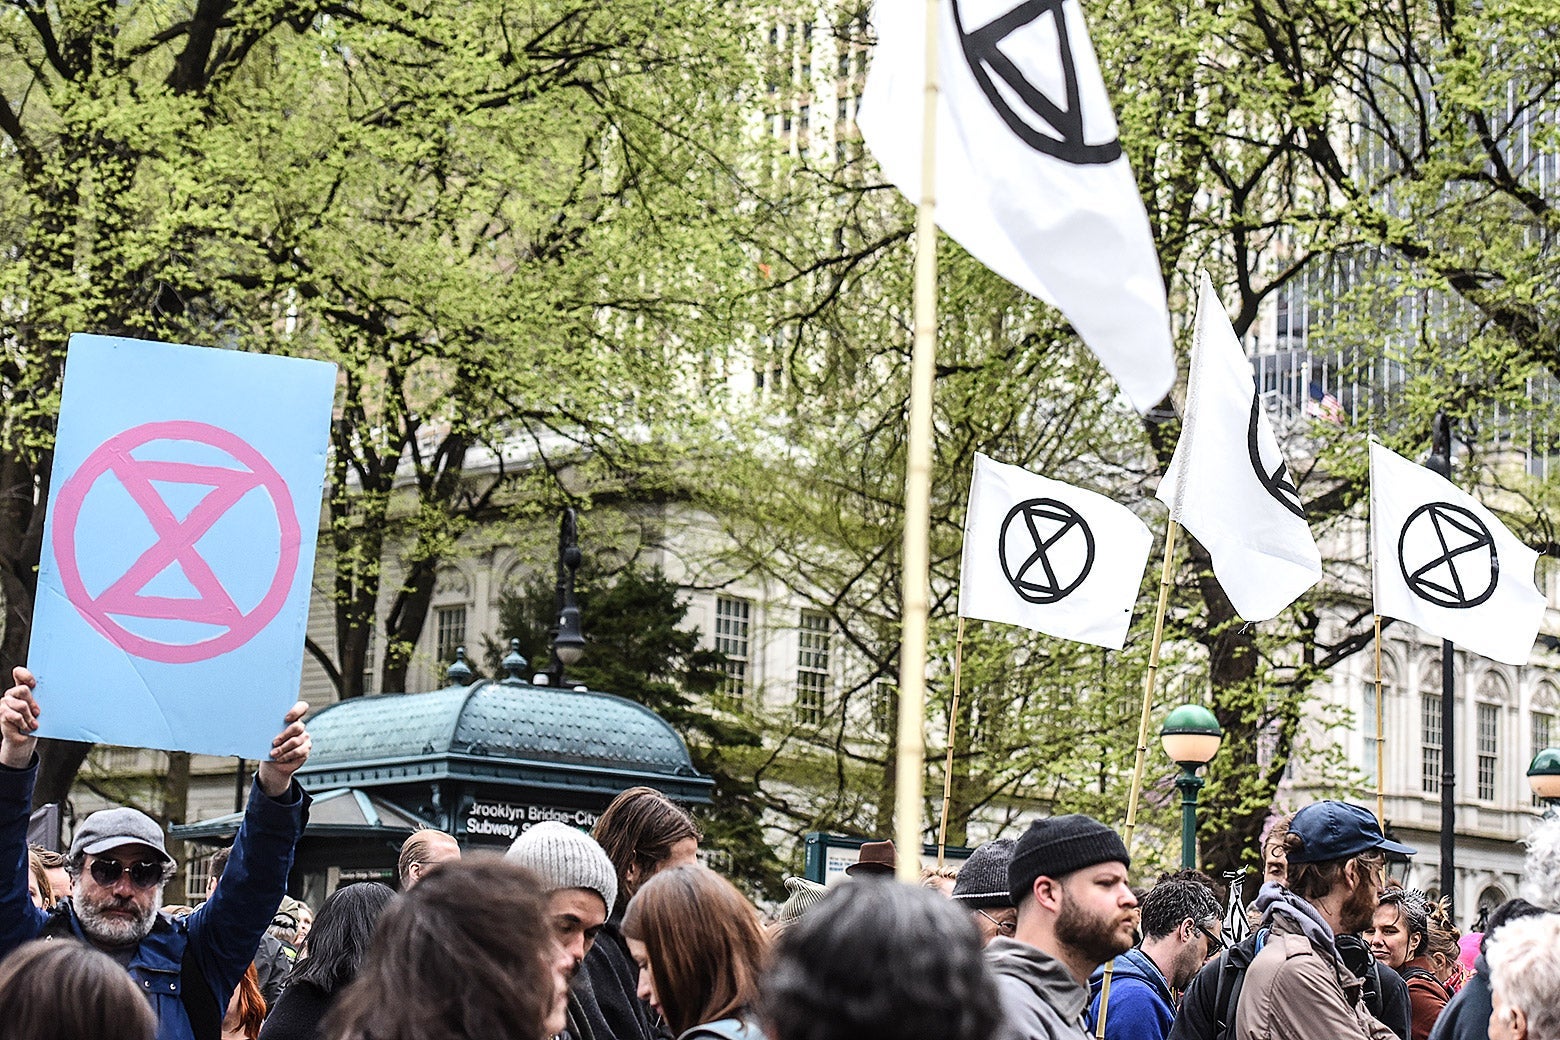 Protesters hold signs displaying the extinction symbol, which shows a circle with two triangles.